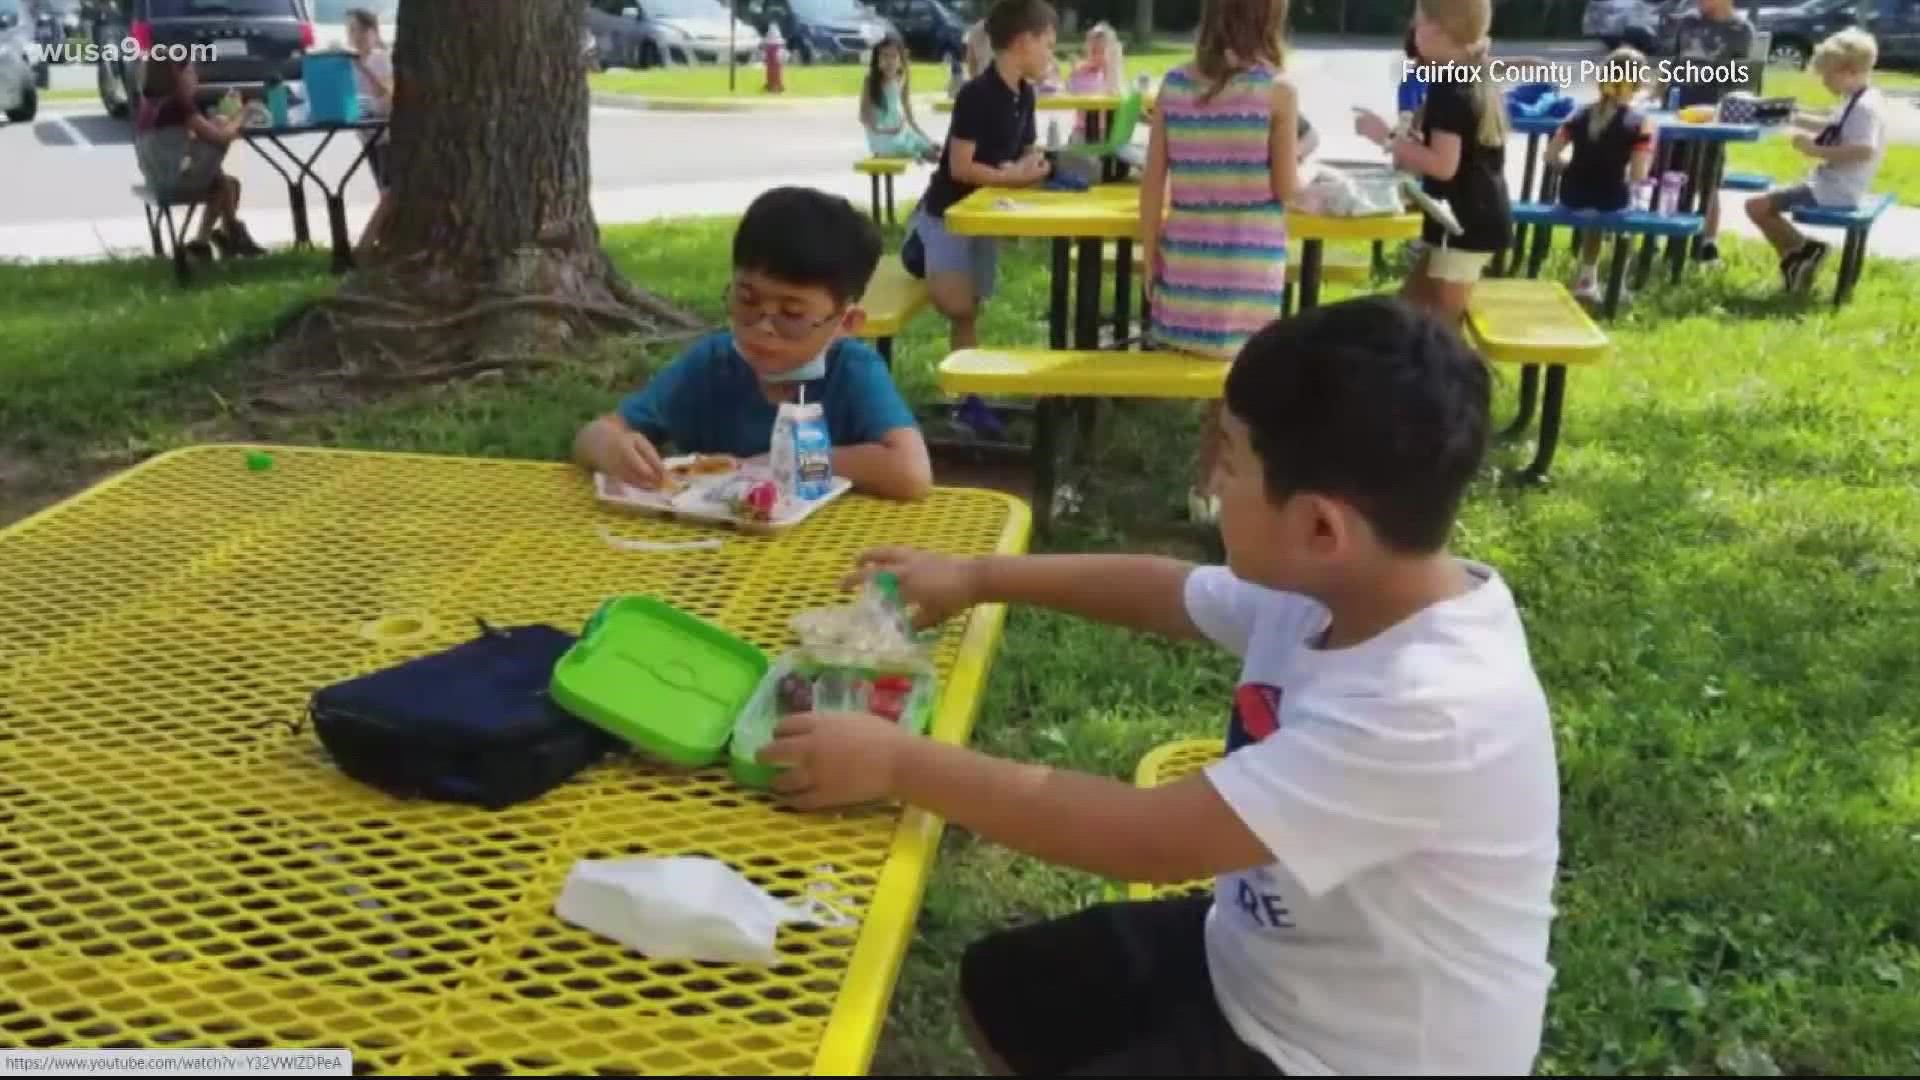 Several parents said they were worried about social distancing during lunch.